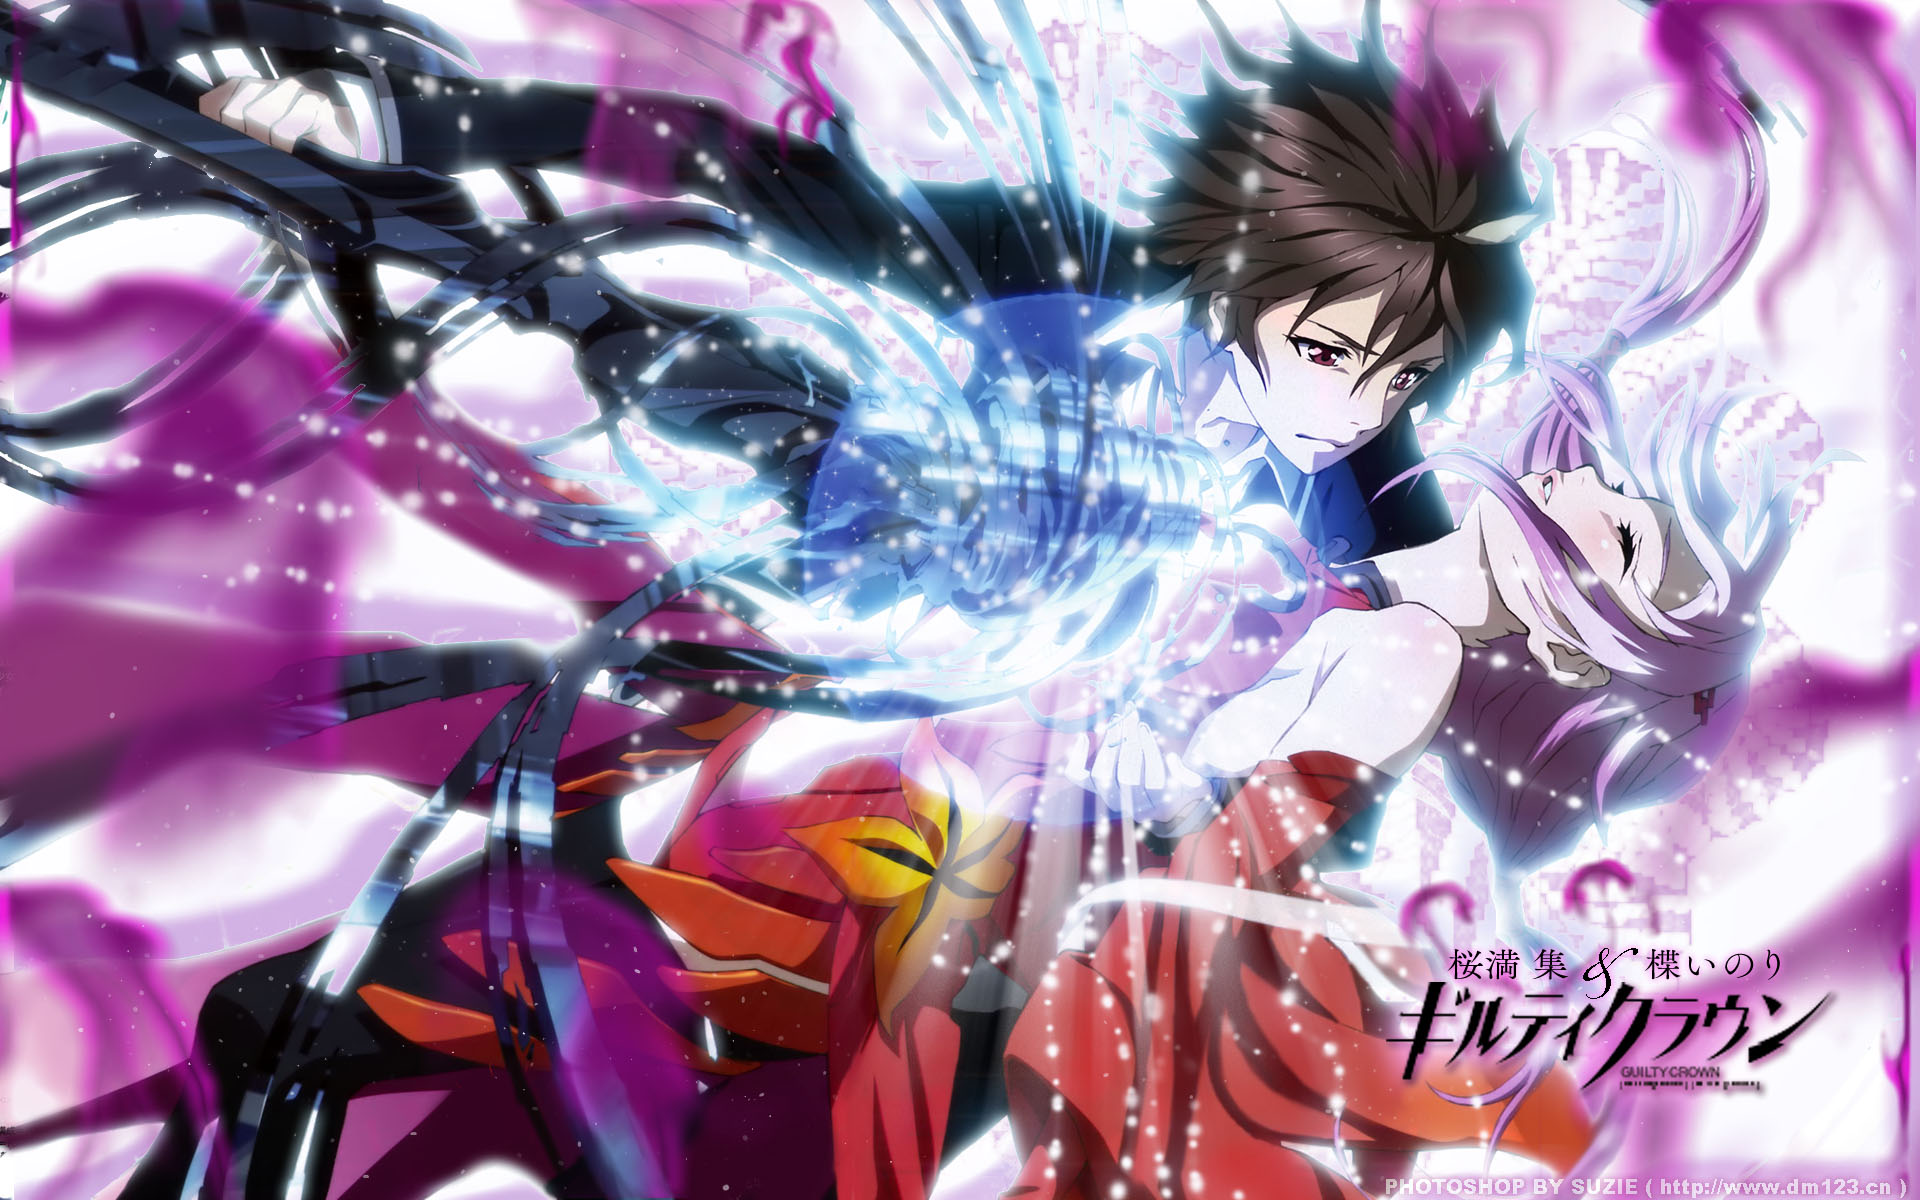 Guilty Crown Res: 1920x1200 / Size:371kb. Views: 120274